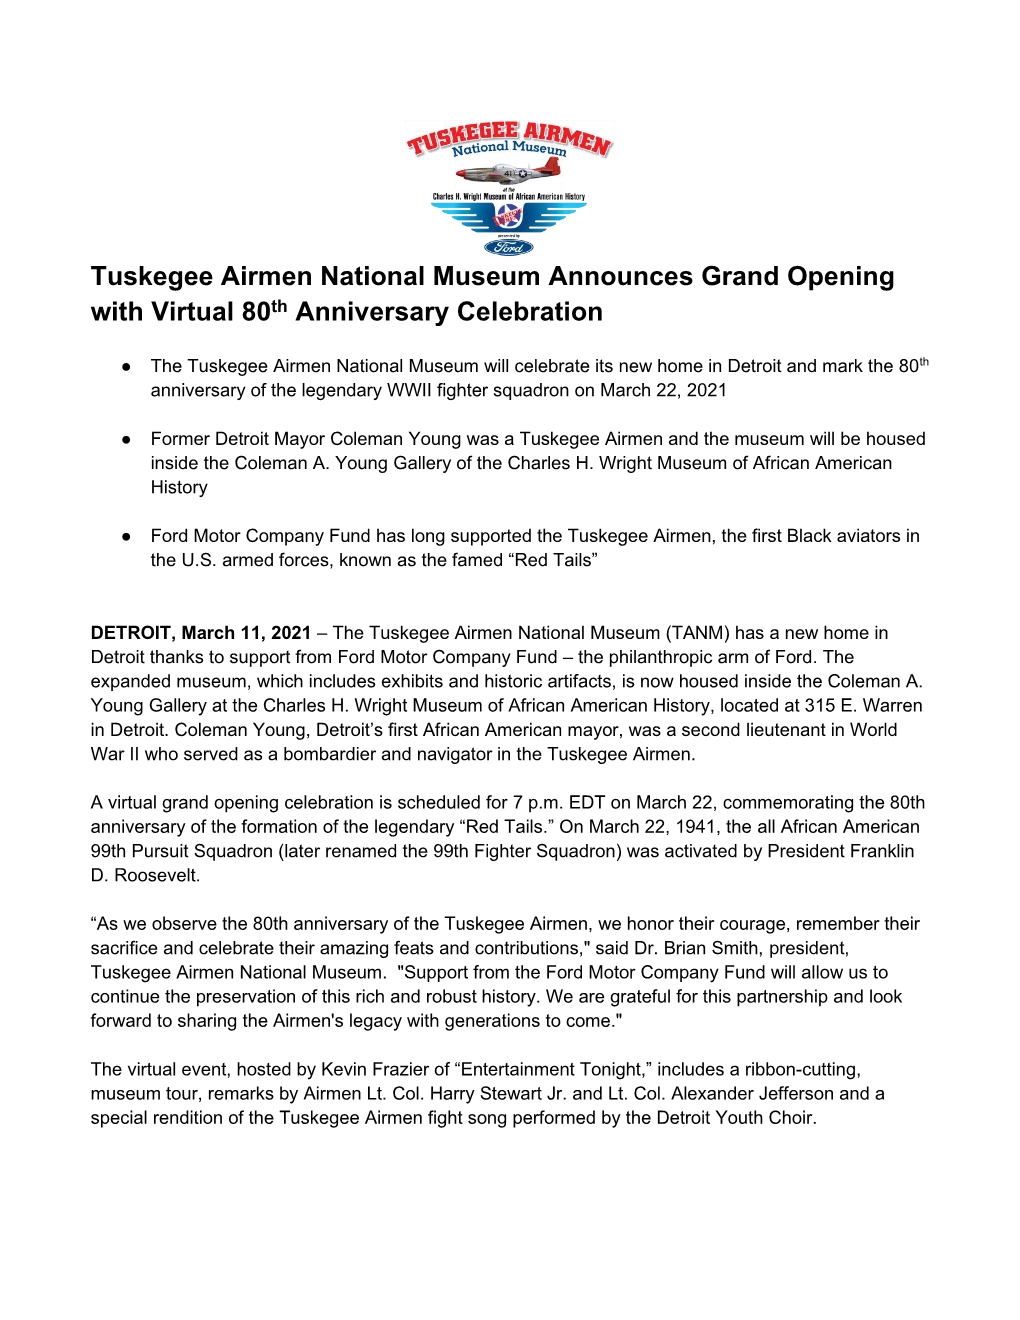 Tuskegee Airmen National Museum Announces Grand Opening with Virtual 80Th Anniversary Celebration